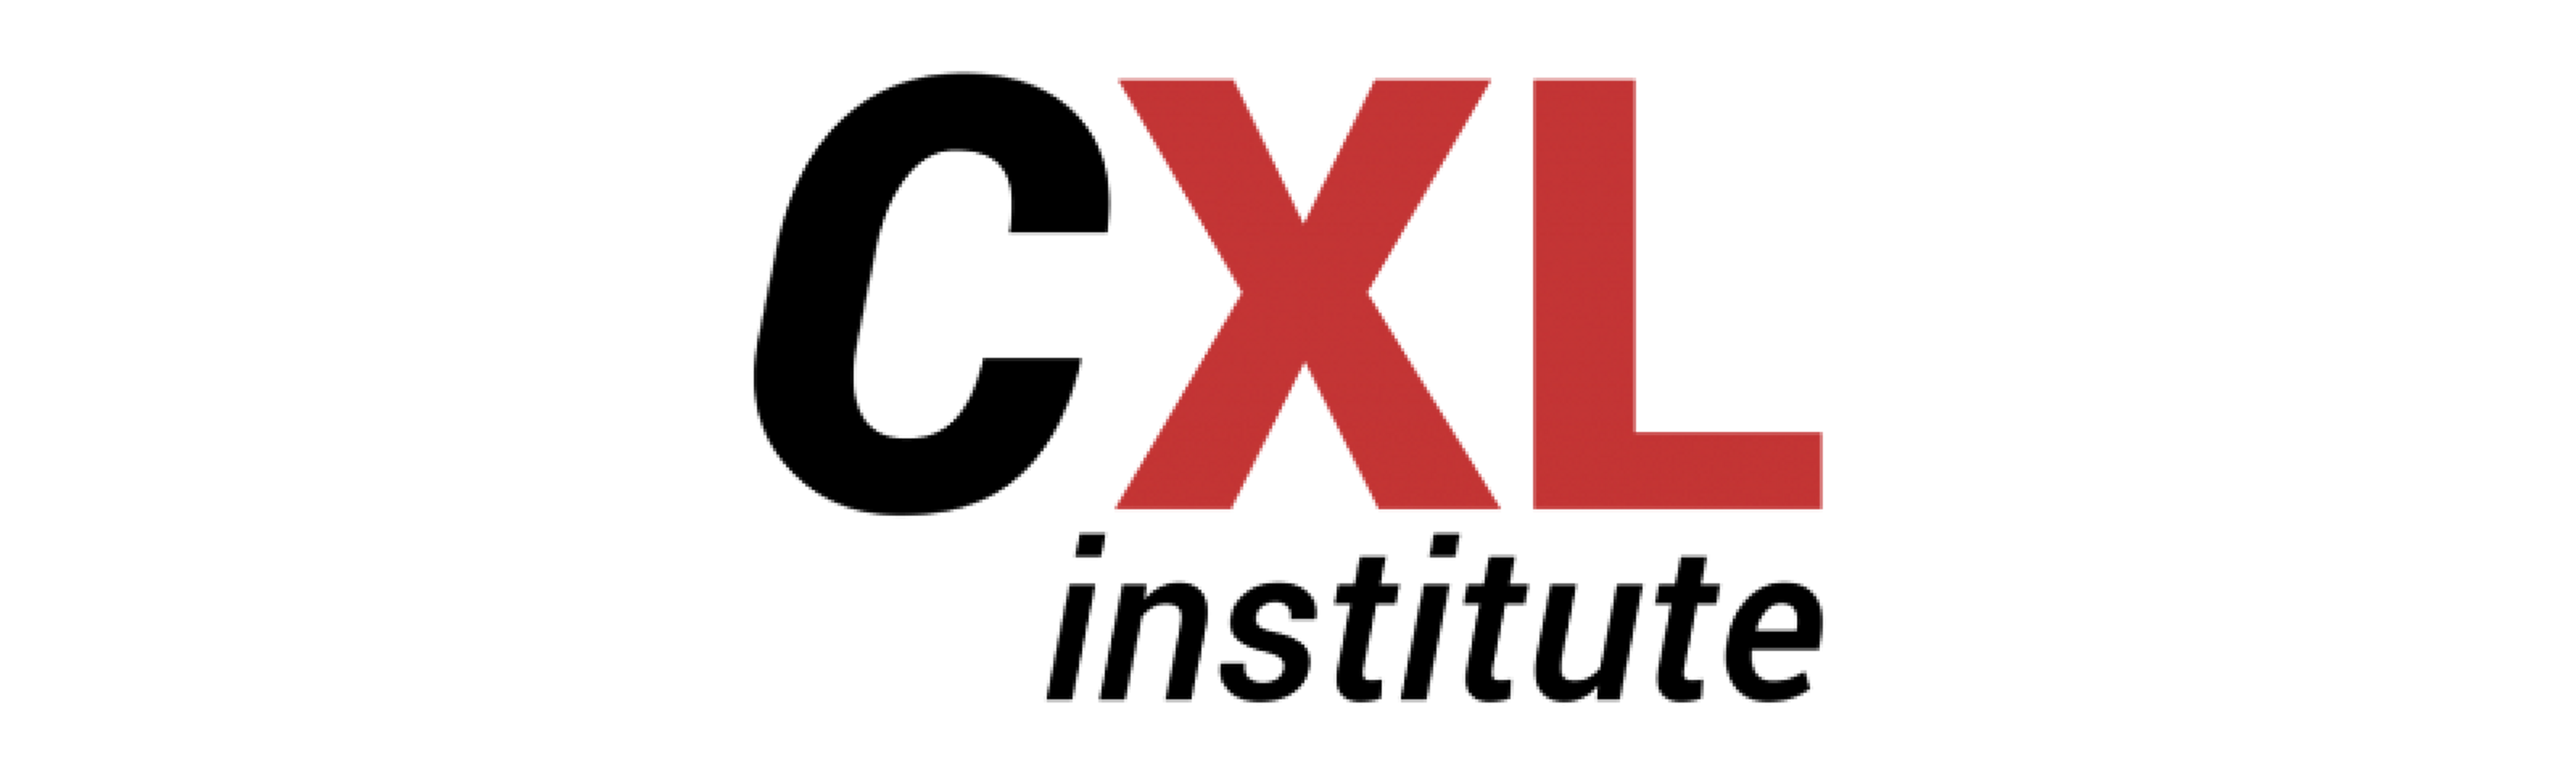 CXL Institute Certification in Digital Psychology and Persuasion